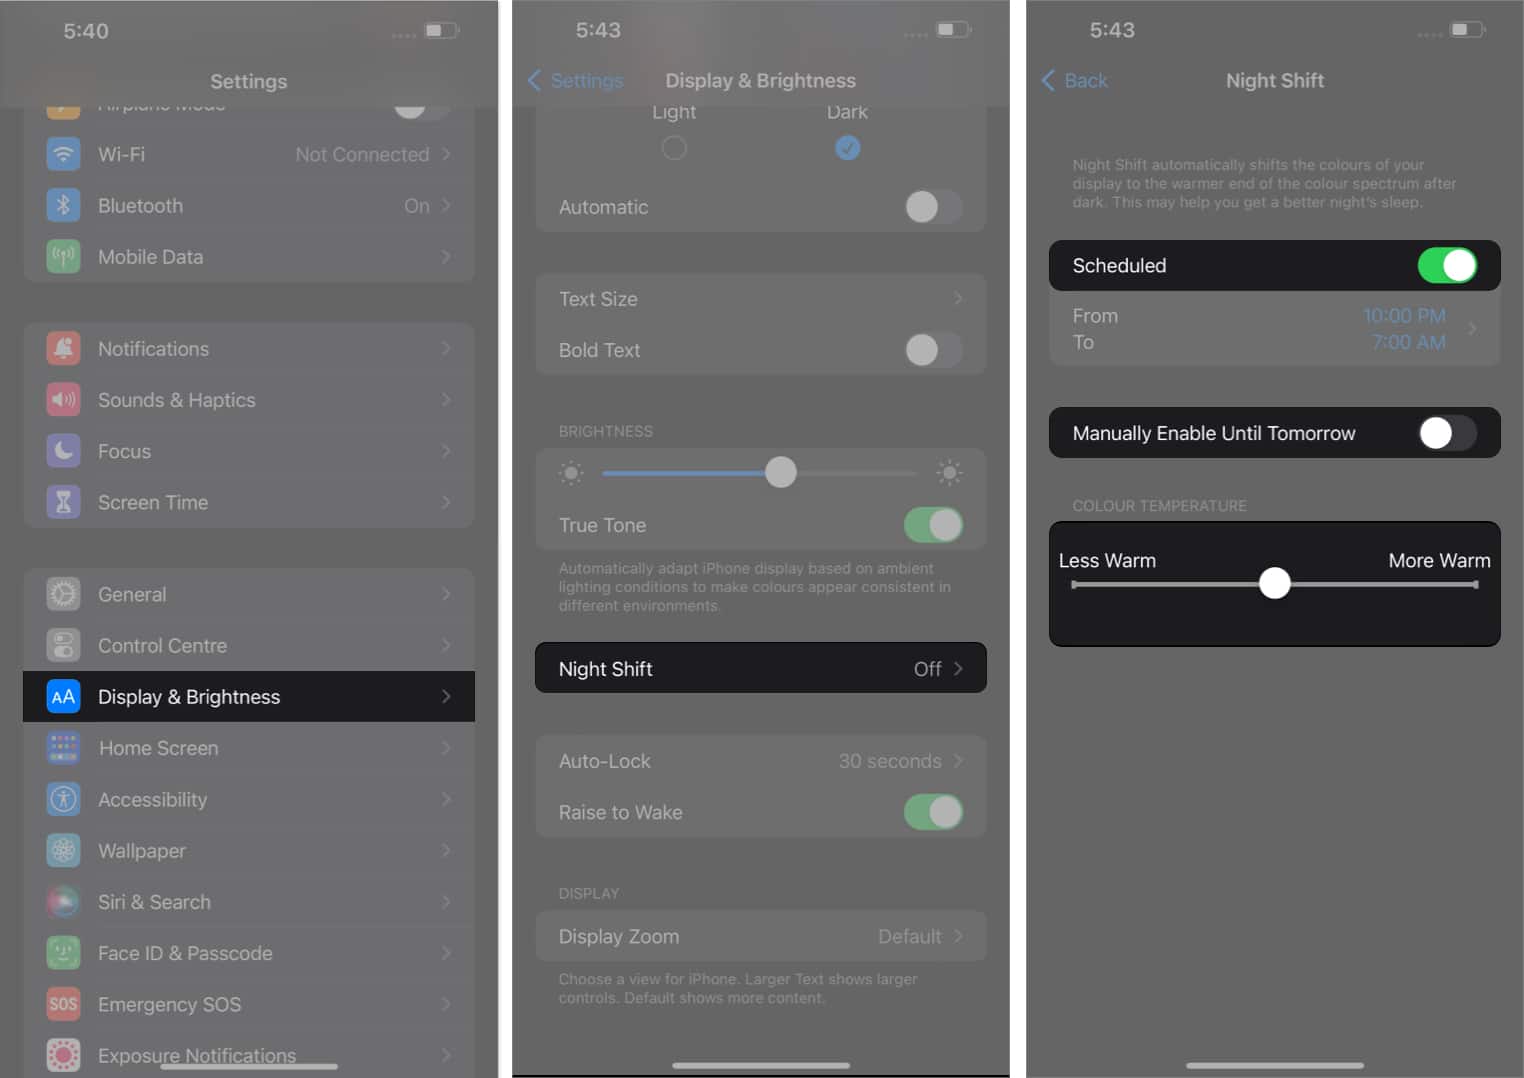 Go to Display & Brightness, choose the Night Shift option, make changes in settings